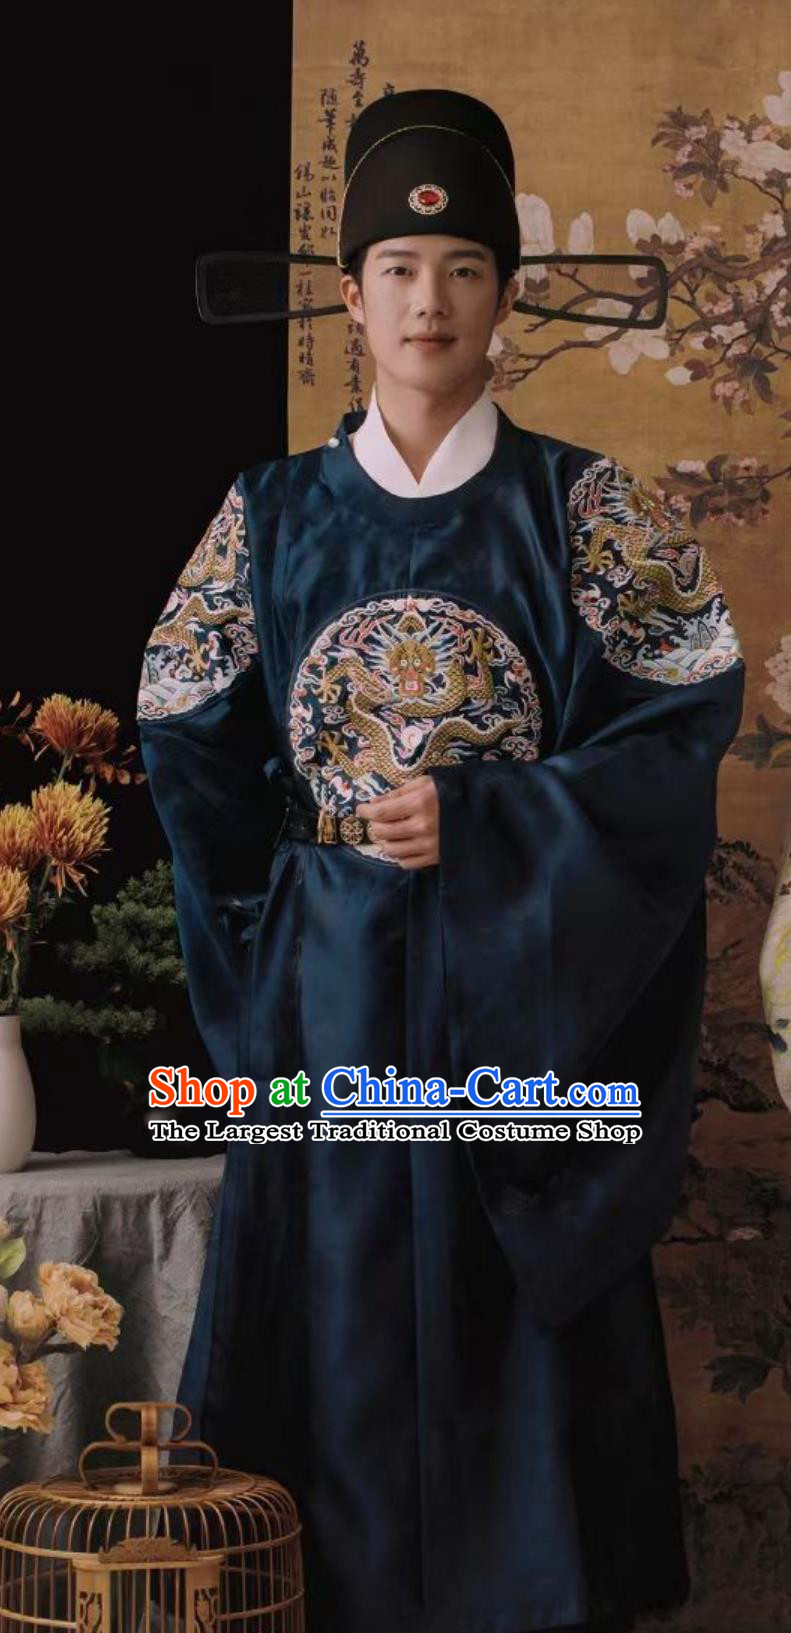 Traditional Hanfu Man Wedding Clothing Ancient Chinese Ming Dynasty Costumes Blue Official Robe Online Buy